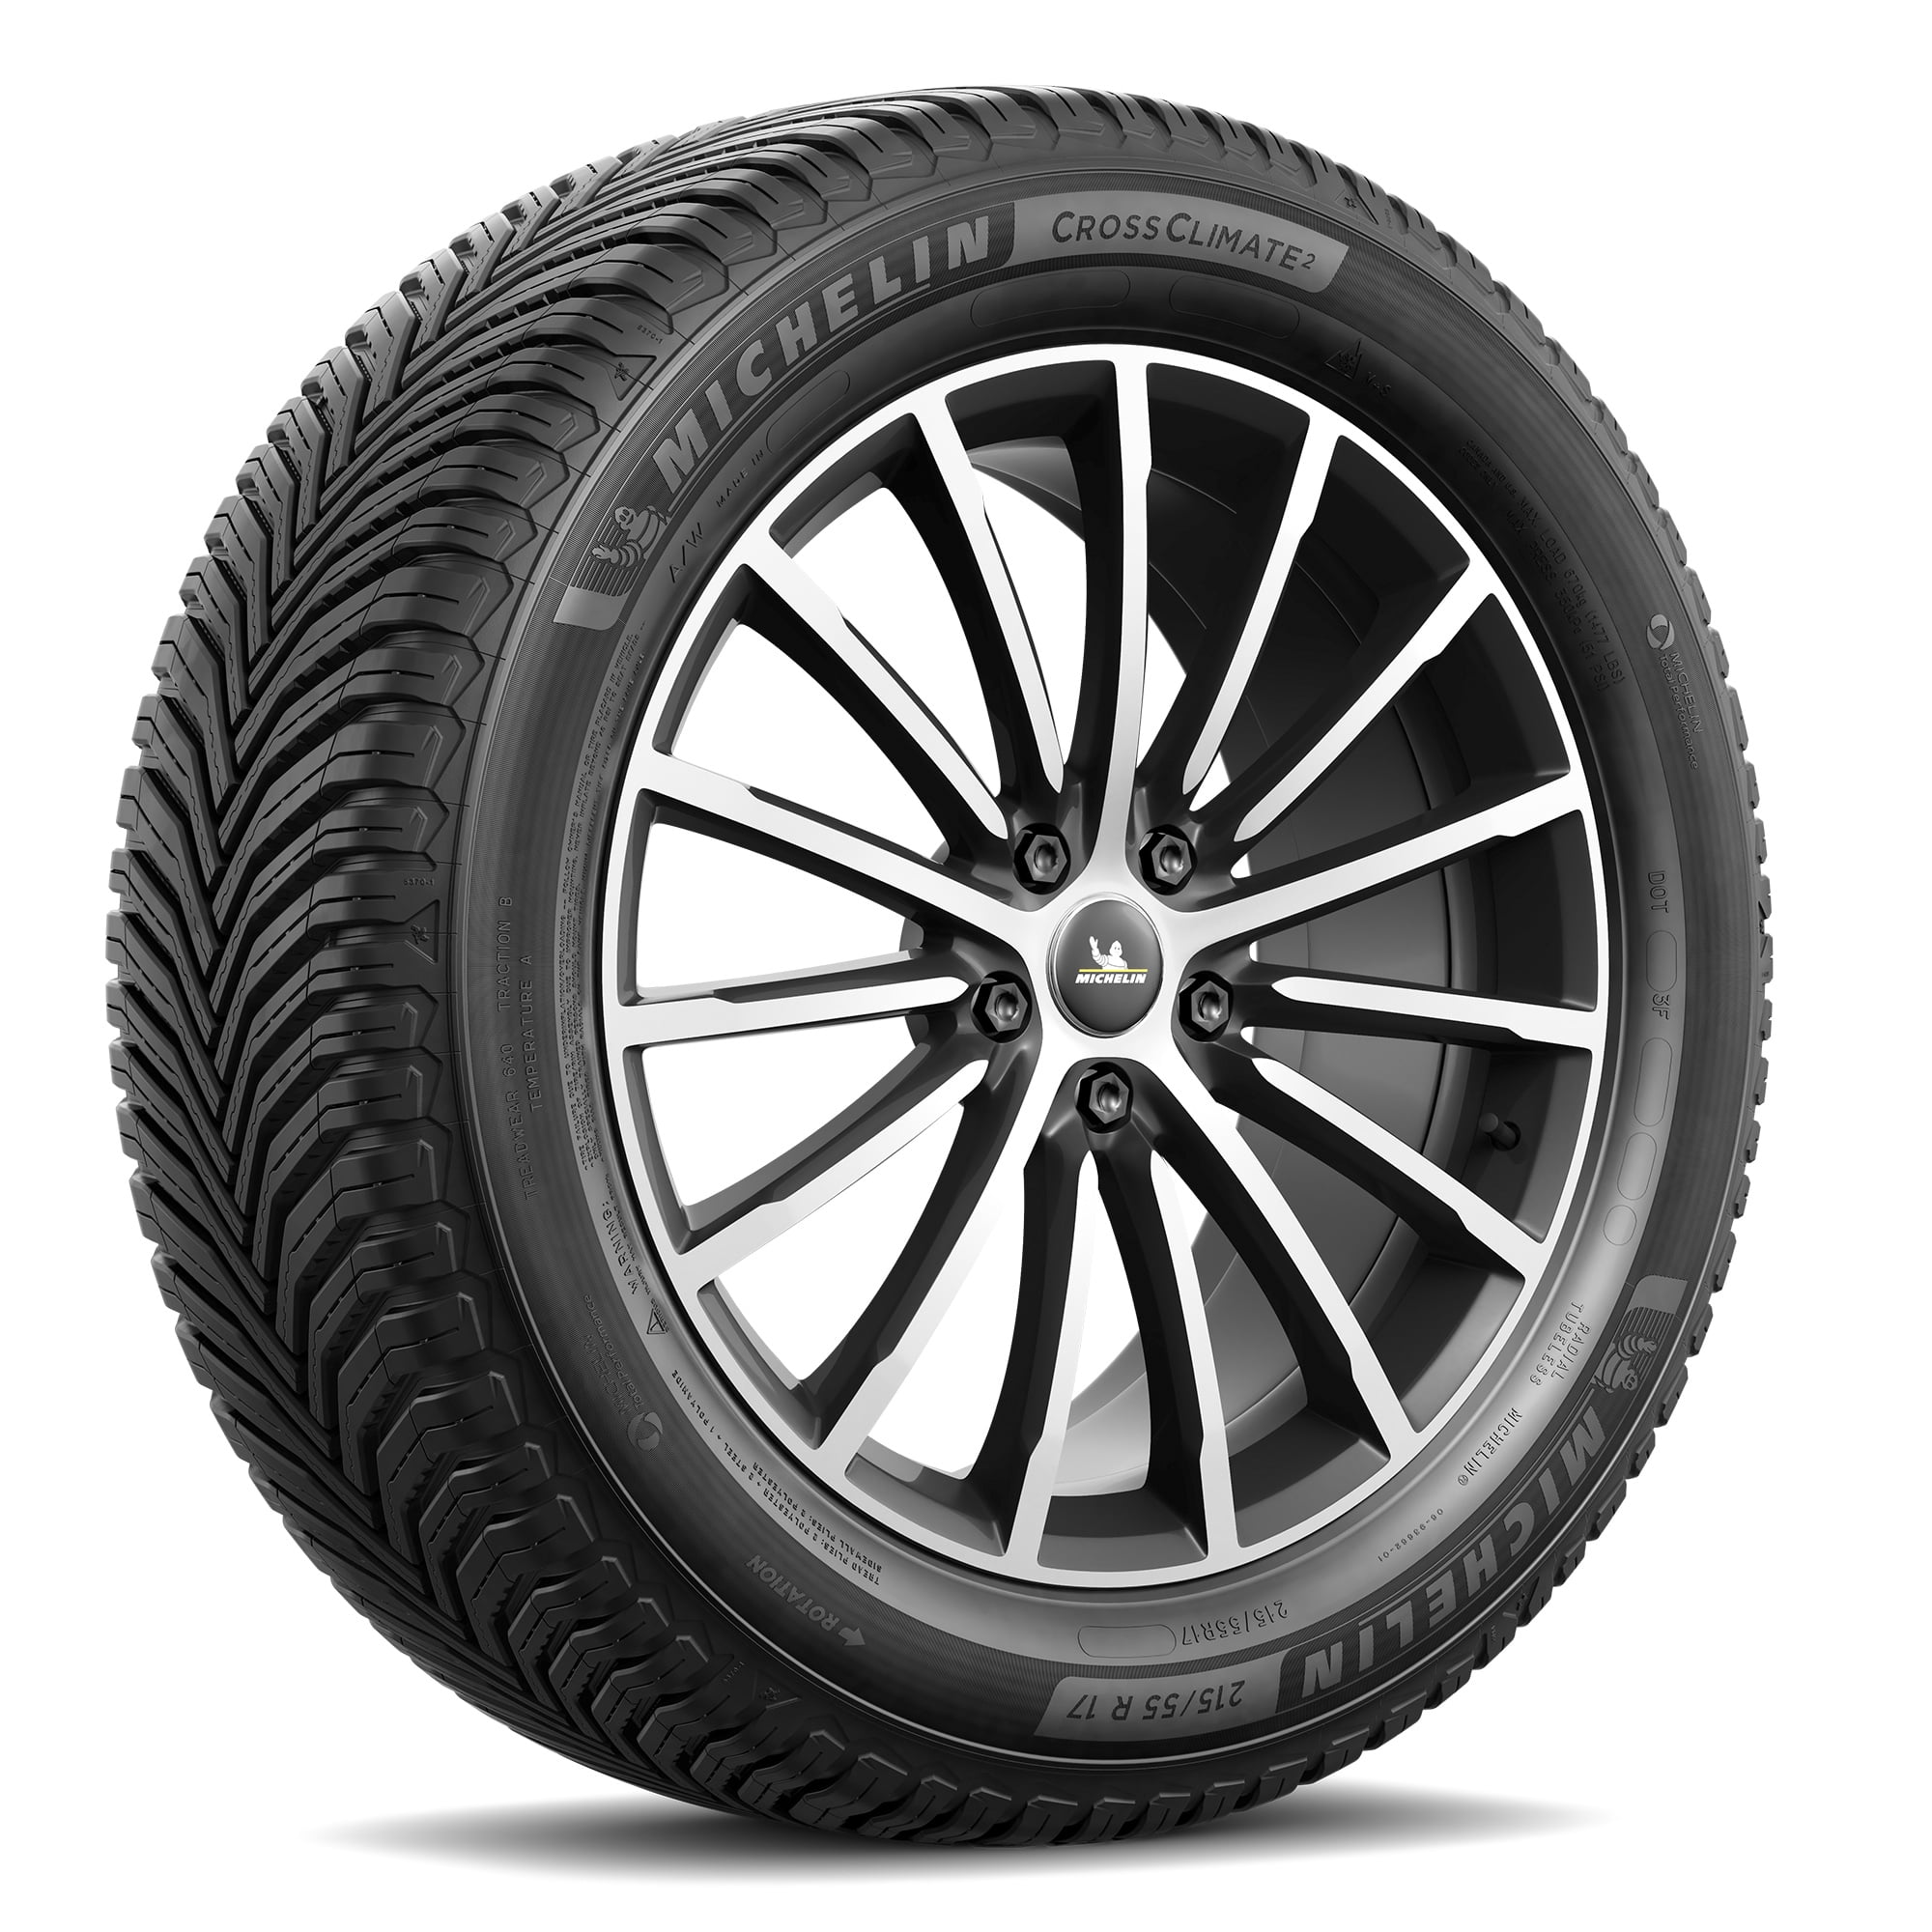 Michelin Cross Climate2 A/W All Weather 215/50R17 95H XL SUV/Crossover Tire